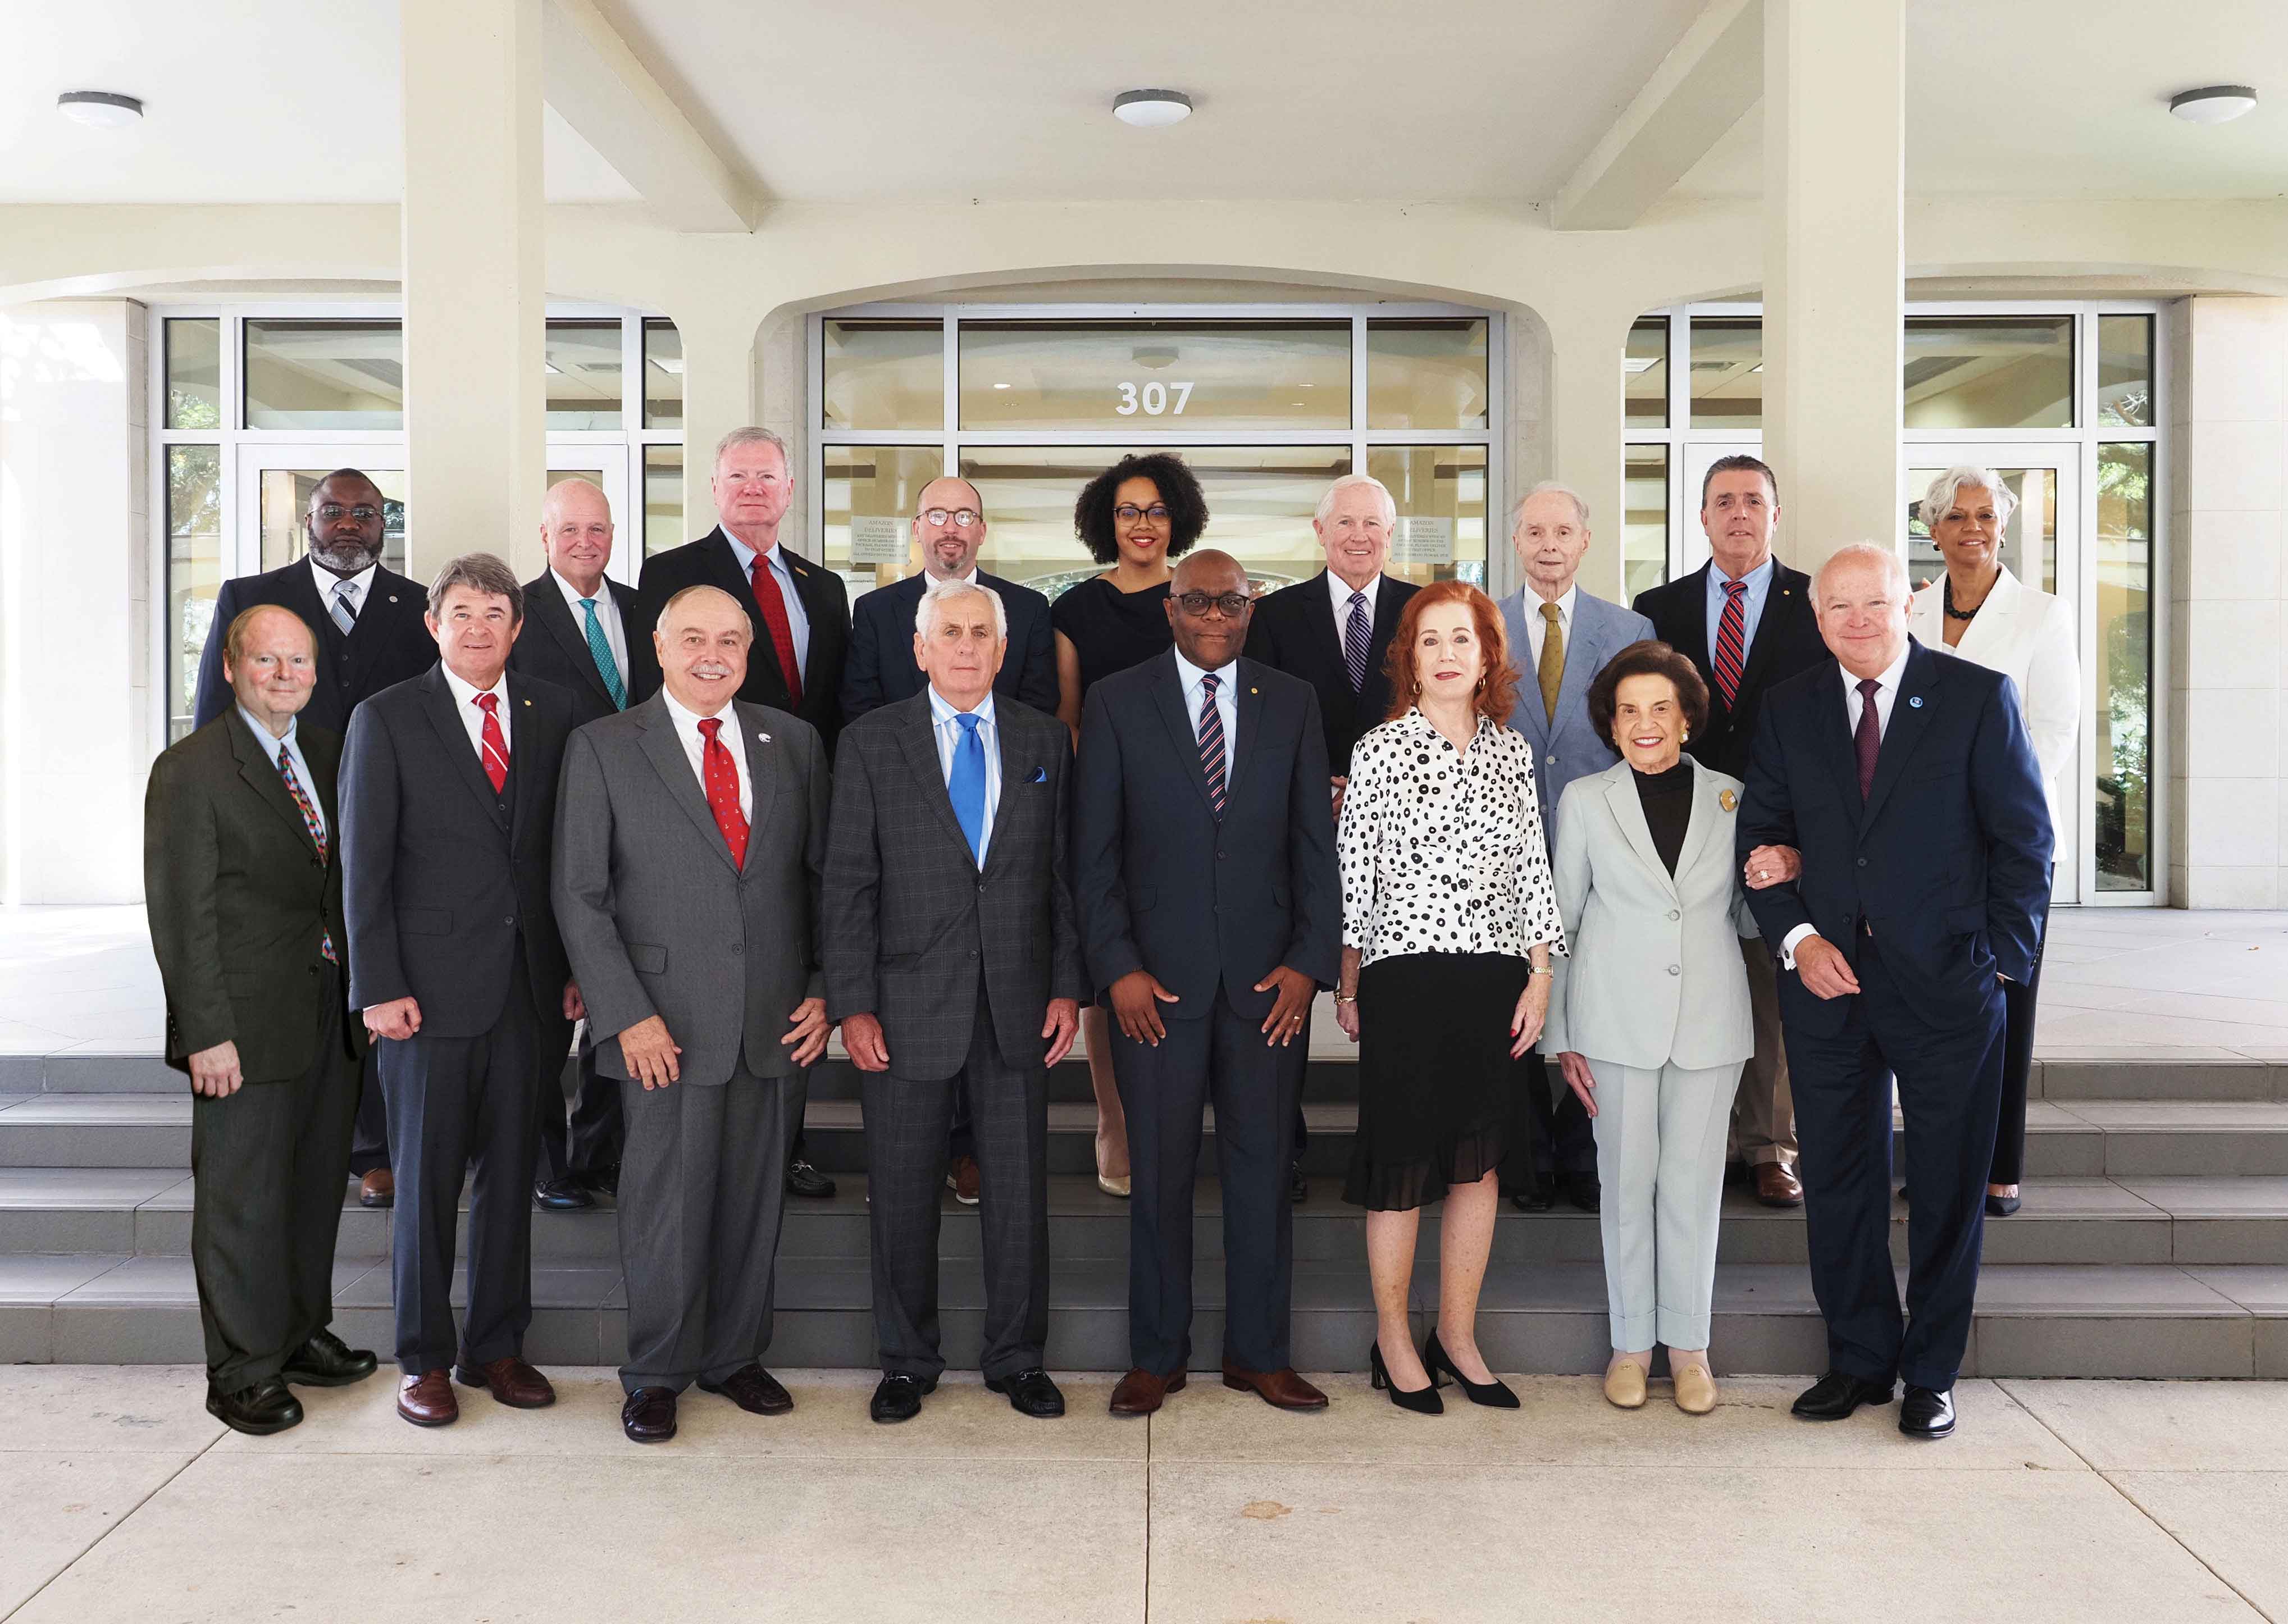 P​i​ctured from the left:  Honorary Trustee Abe Mitchell with Trustees Dr. Steve Furr; Dr. Scott Charlton; Ron Jenkins; Chandra Brown Stewart; Jimmy Shumock; Jim Yance; Ken Simon - Chair pro tempore; Ron Graham; Governor Kay Ivey - ex officio President and Chair​; Dr. Steve Stokes; Tom Corcoran; Lenus Perkins; Arlene Mitchell; Mike Windom; Alexis Atkins and Margie Tuckson; and President Tony Waldrop.